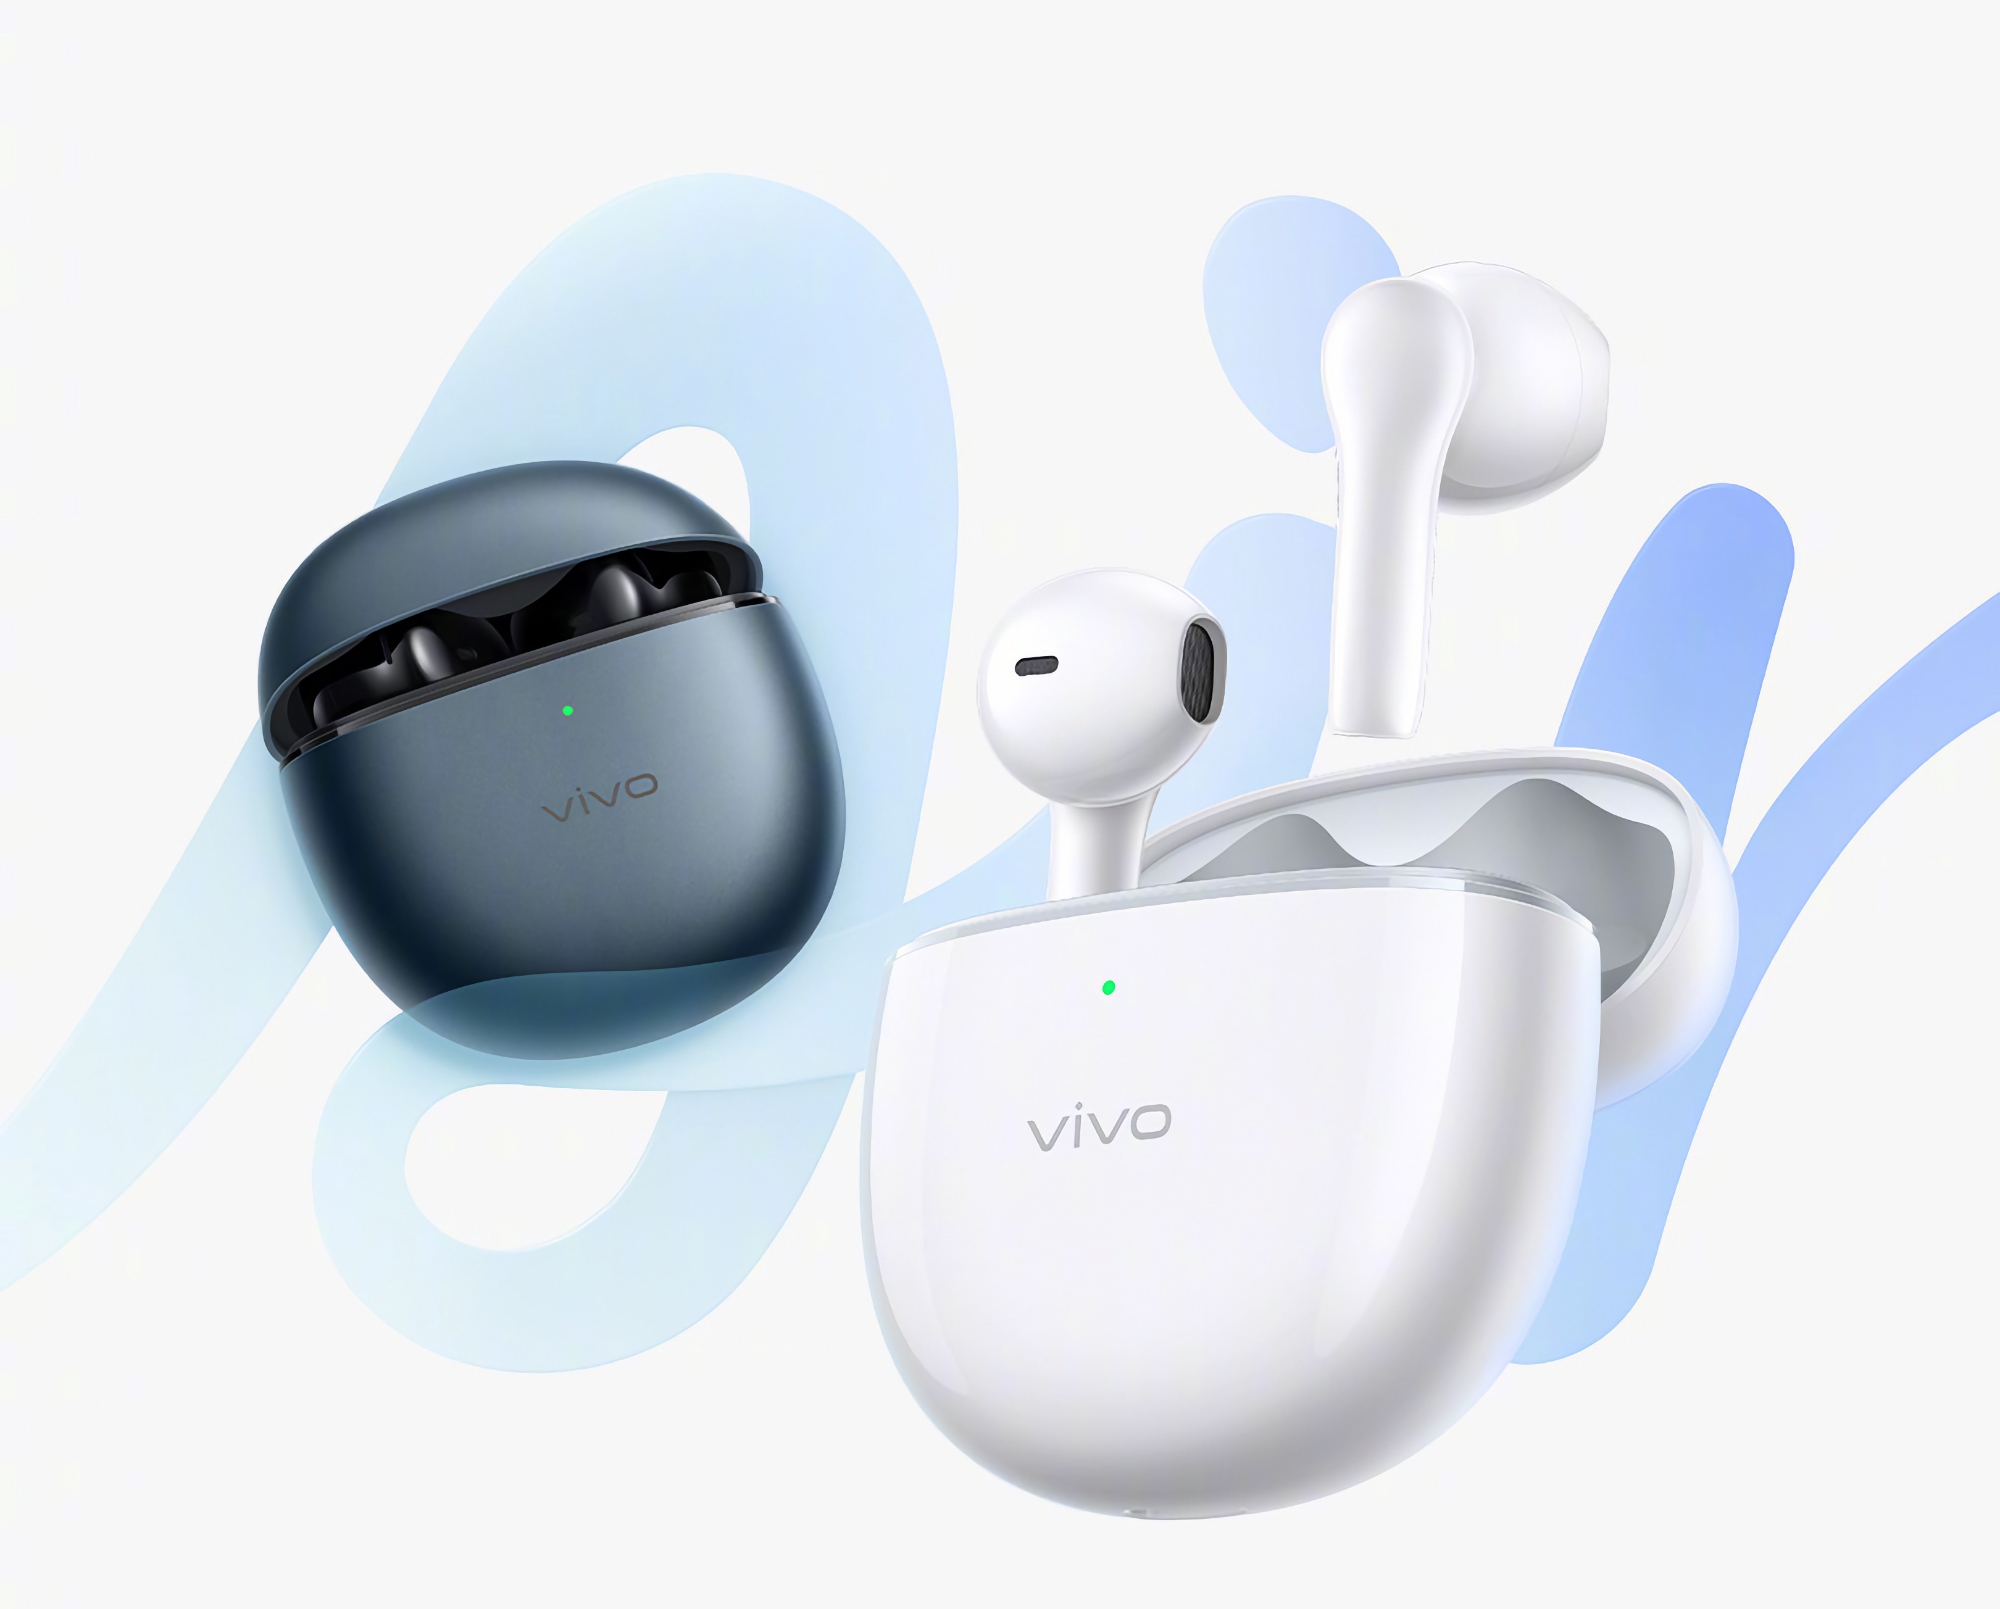 Not just the vivo S17 and vivo S17 Pro smartphones: vivo will unveil more vivo TWS Air Pro earphones on May 31